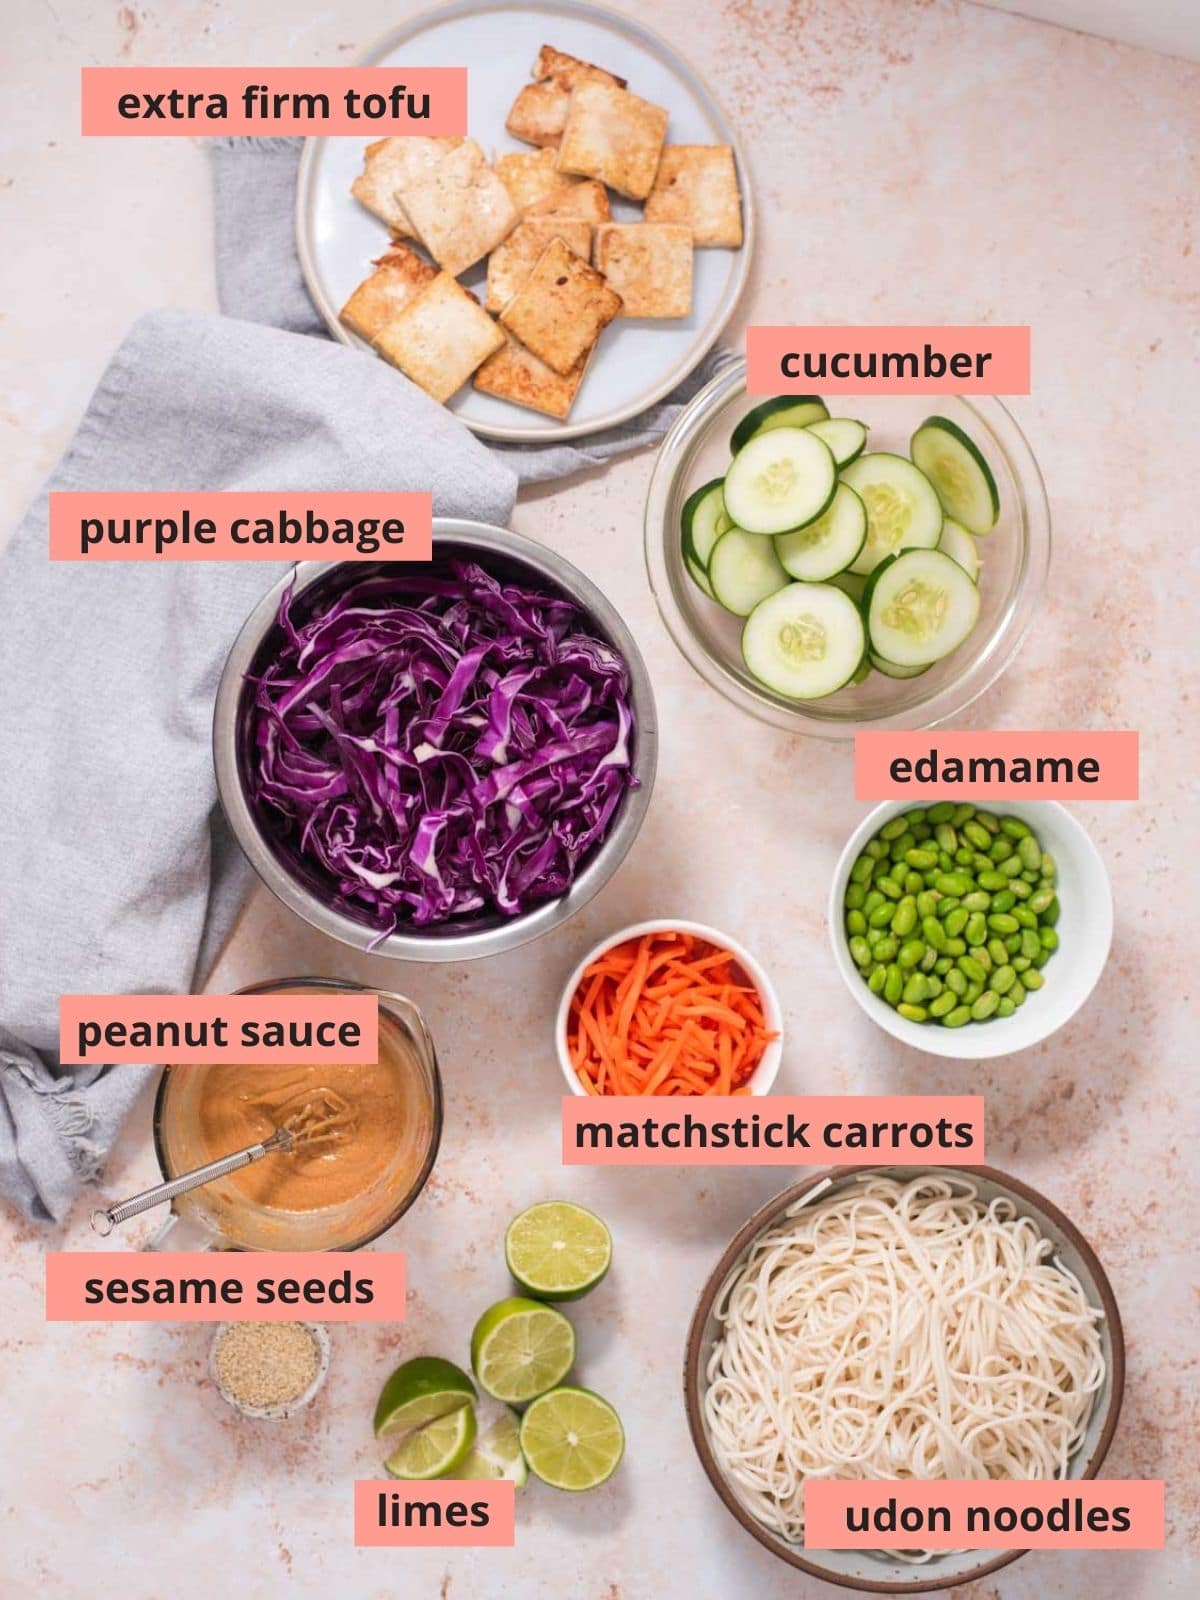 Labeled ingredients used to make spring rolls